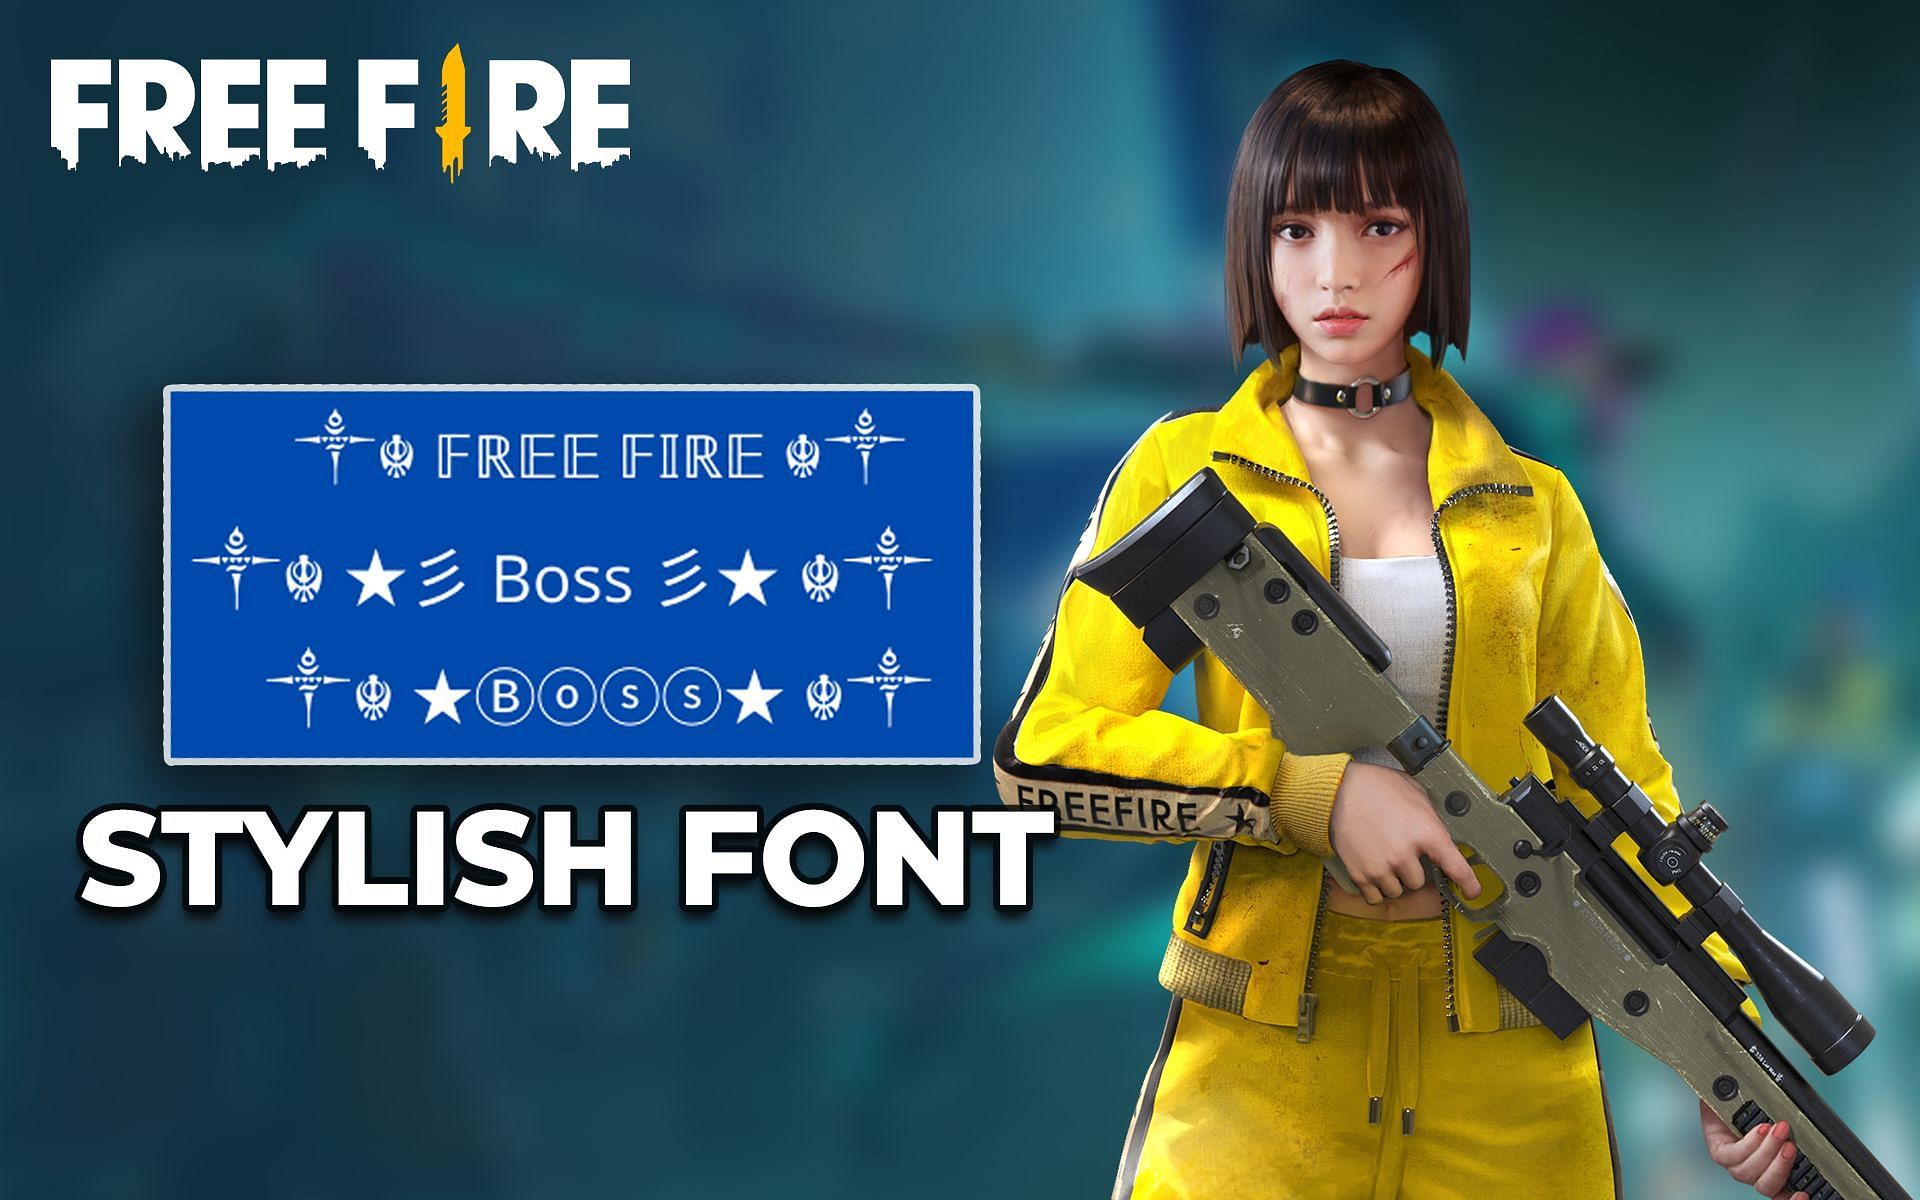 Find cool Free Fire nicknames with stylish font and unique symbols (Image via Sportskeeda)